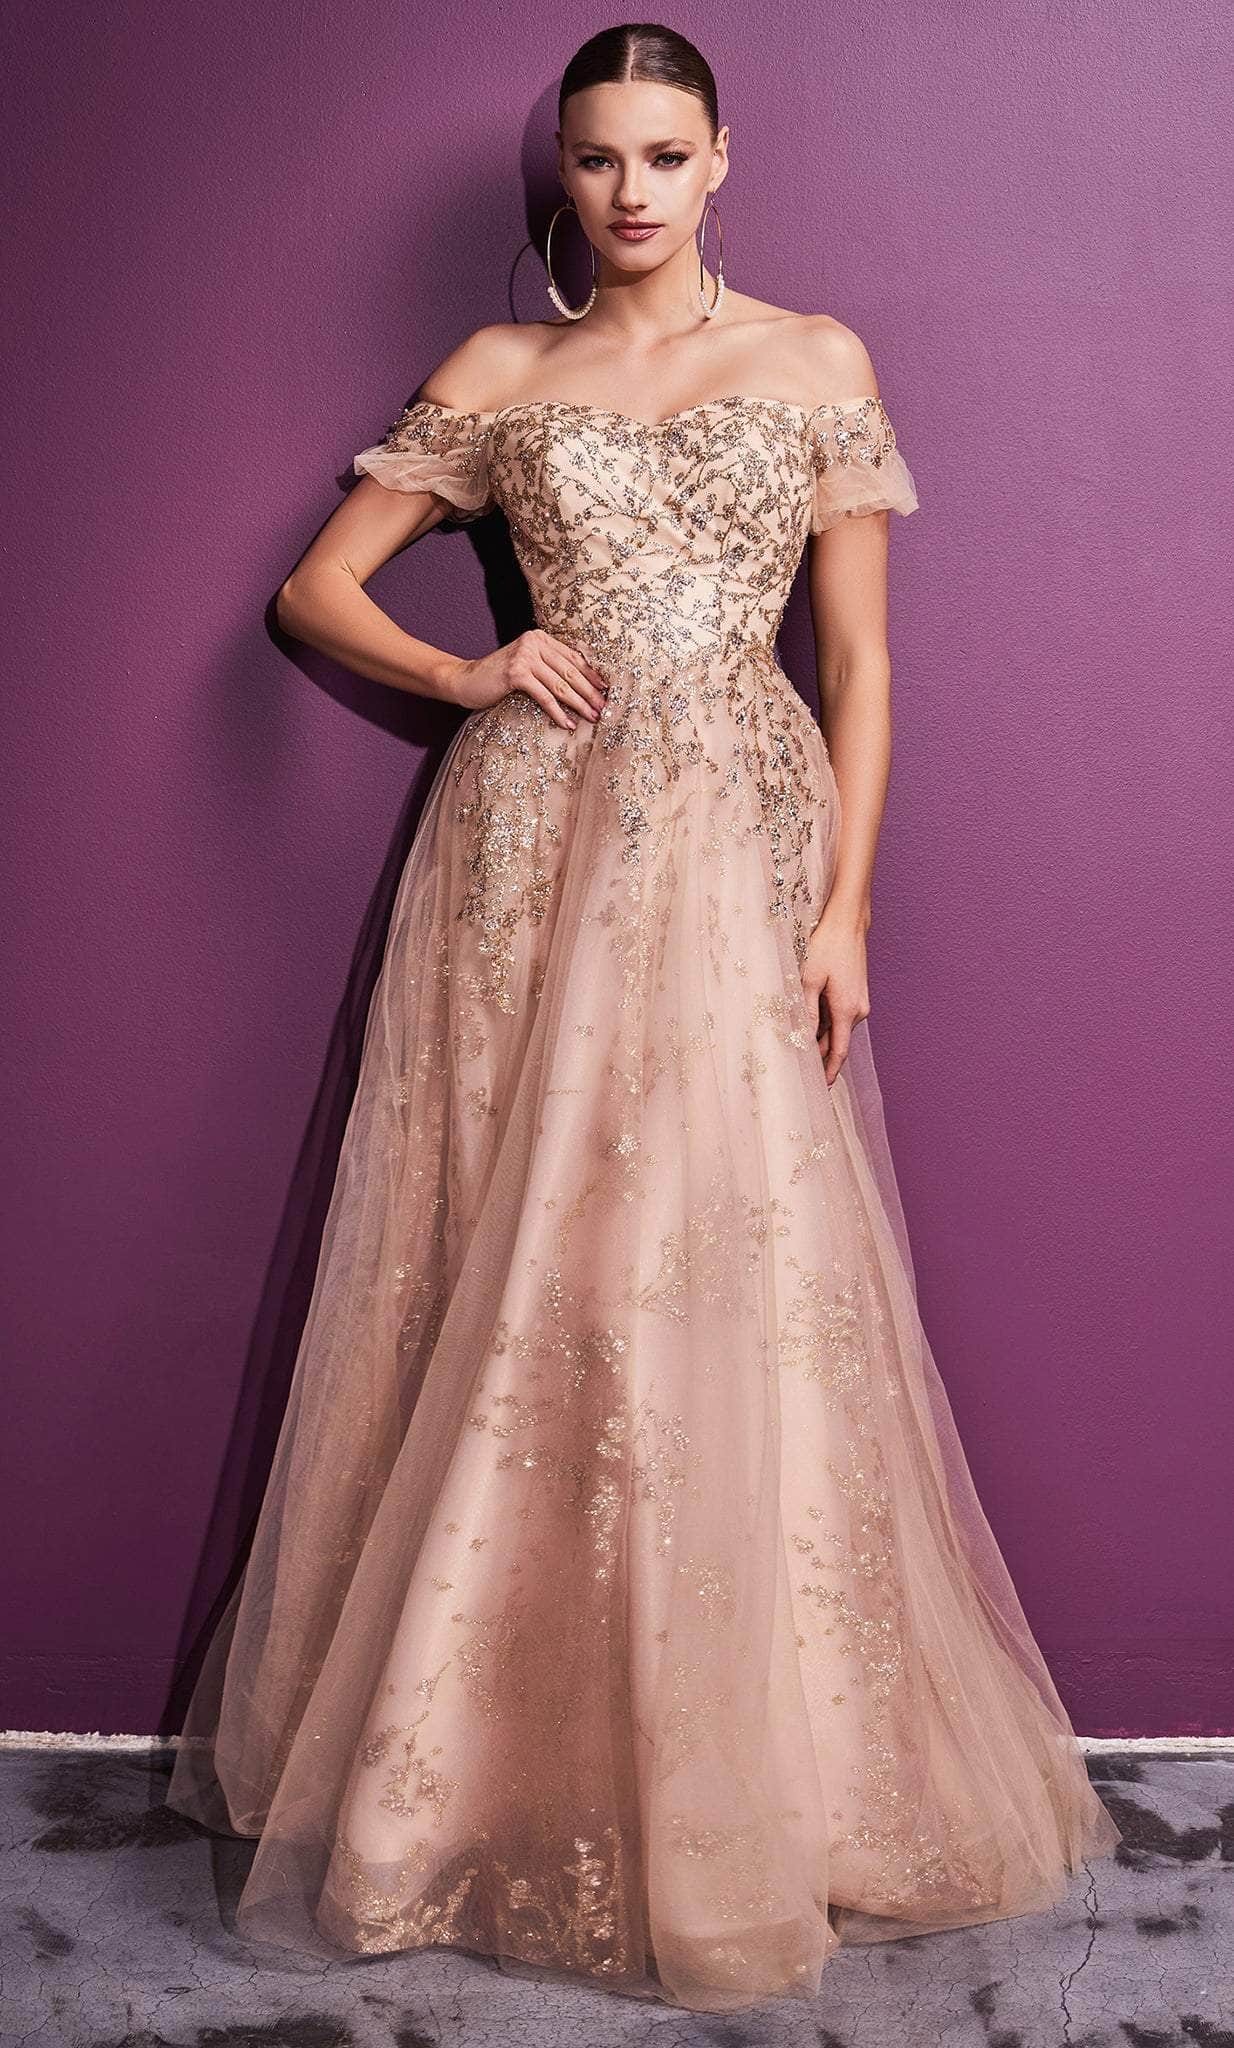 Image of Ladivine C73 - Off Shoulder Glittered Classy Gown